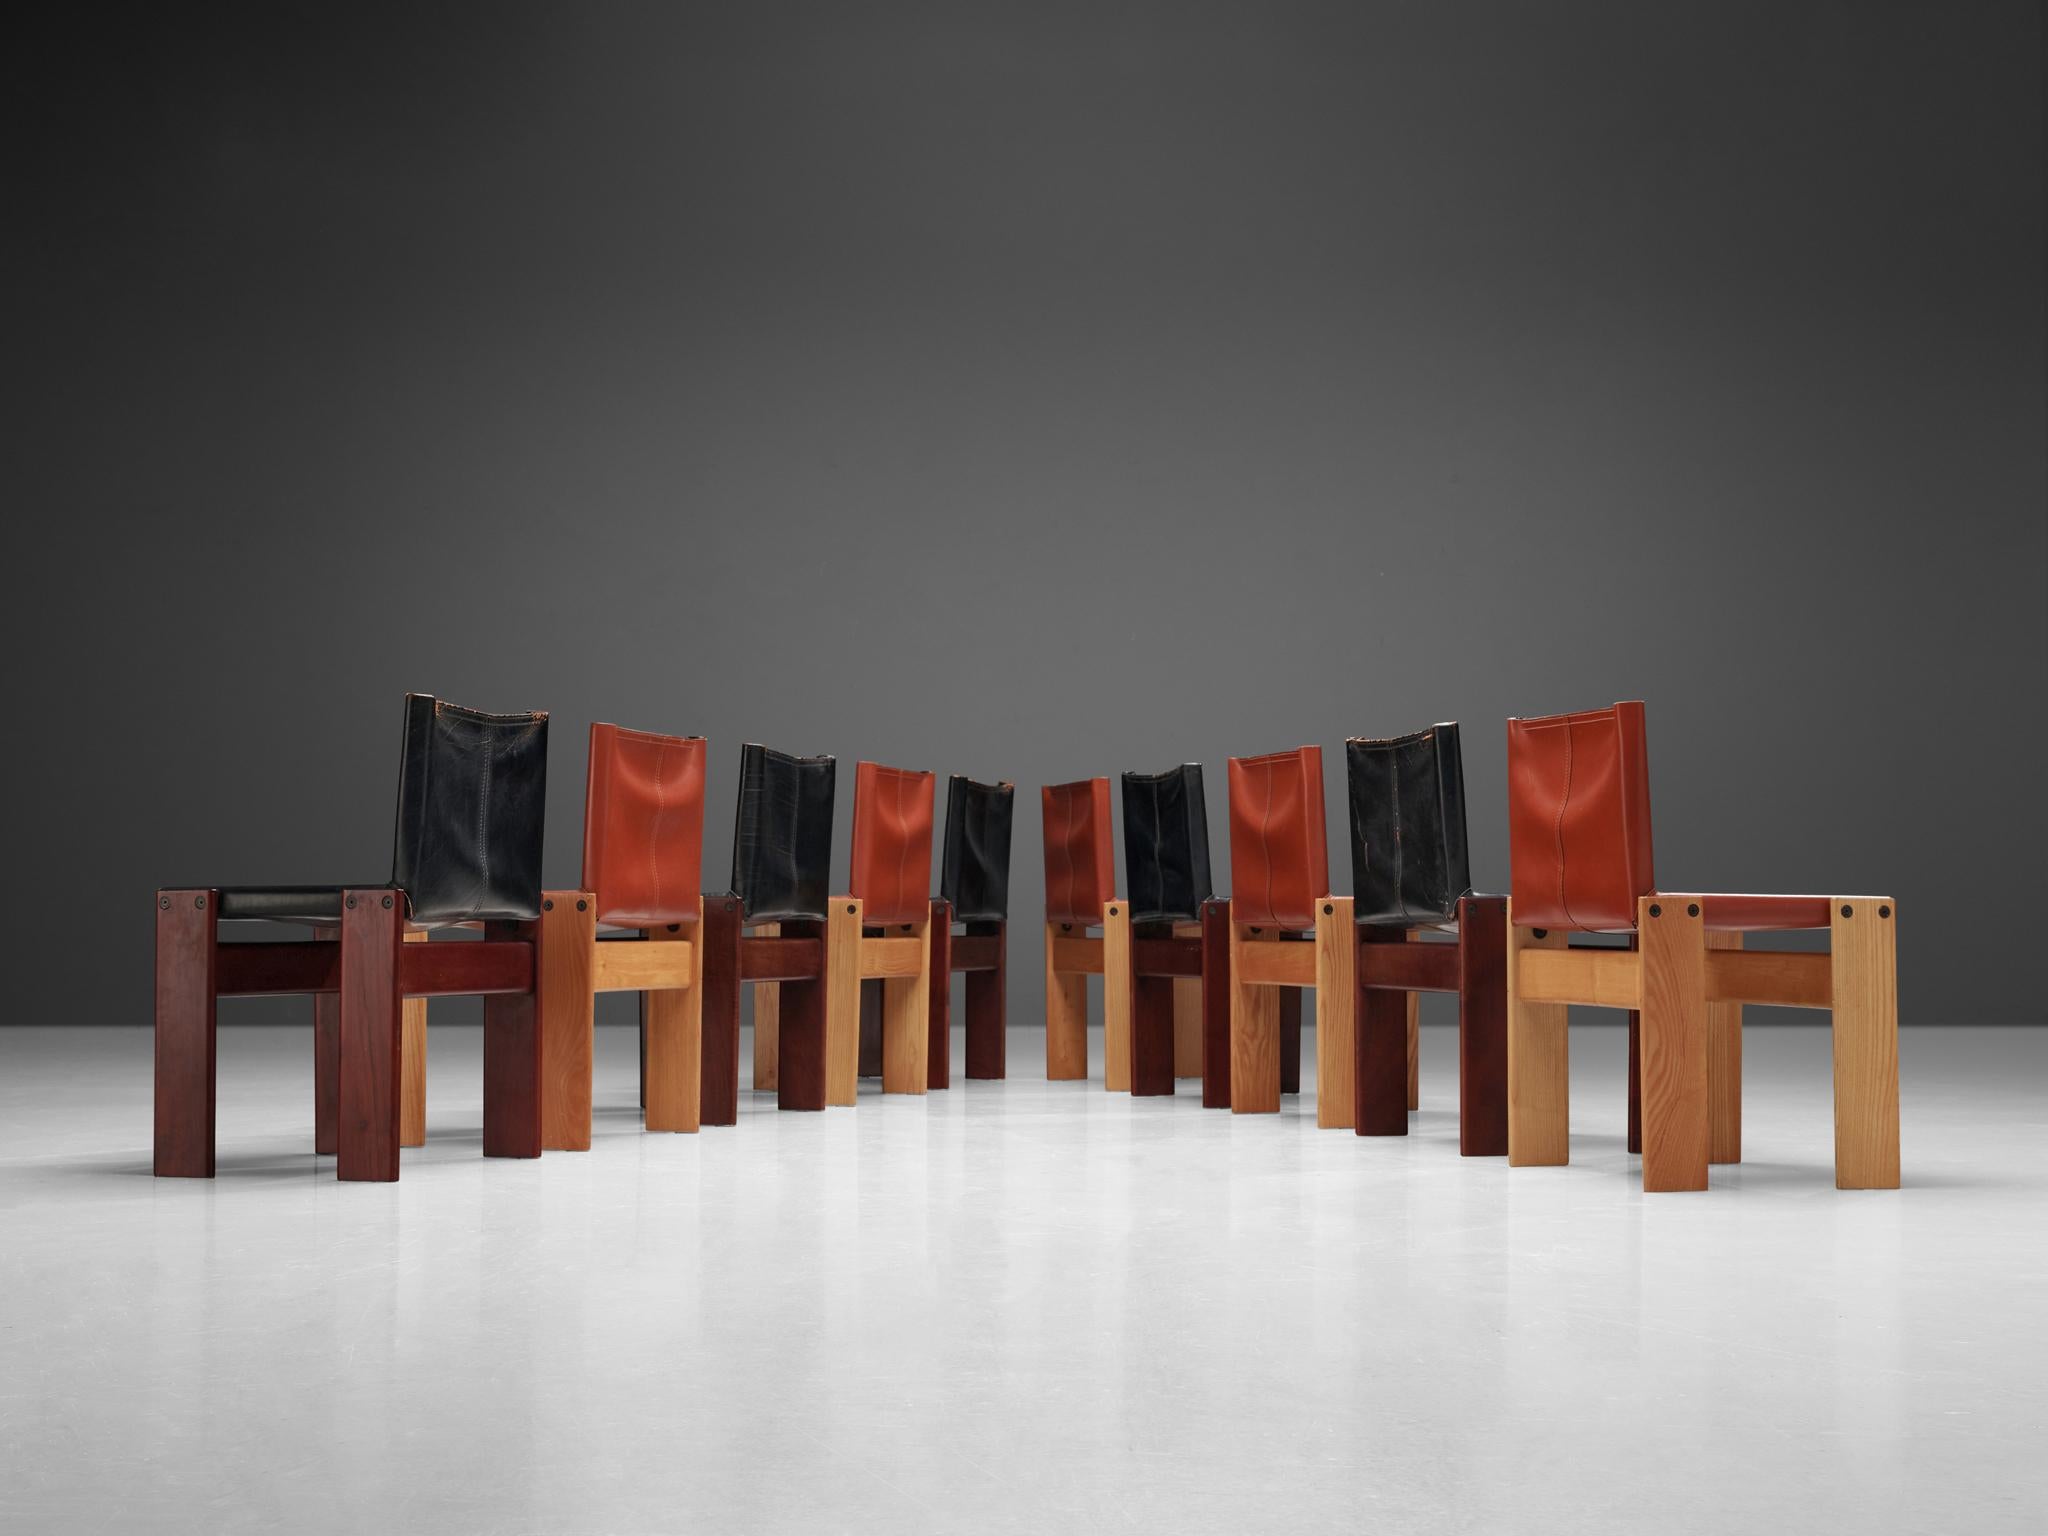 Afra & Tobia Scarpa for Molteni, set of 10 'Monk' dining chairs, lacquered wood, ash, black and red leather, Italy, 1974 

The wonderfully deep black and red leather forms a striking combination with the ash and lacquered wood. Interesting is the